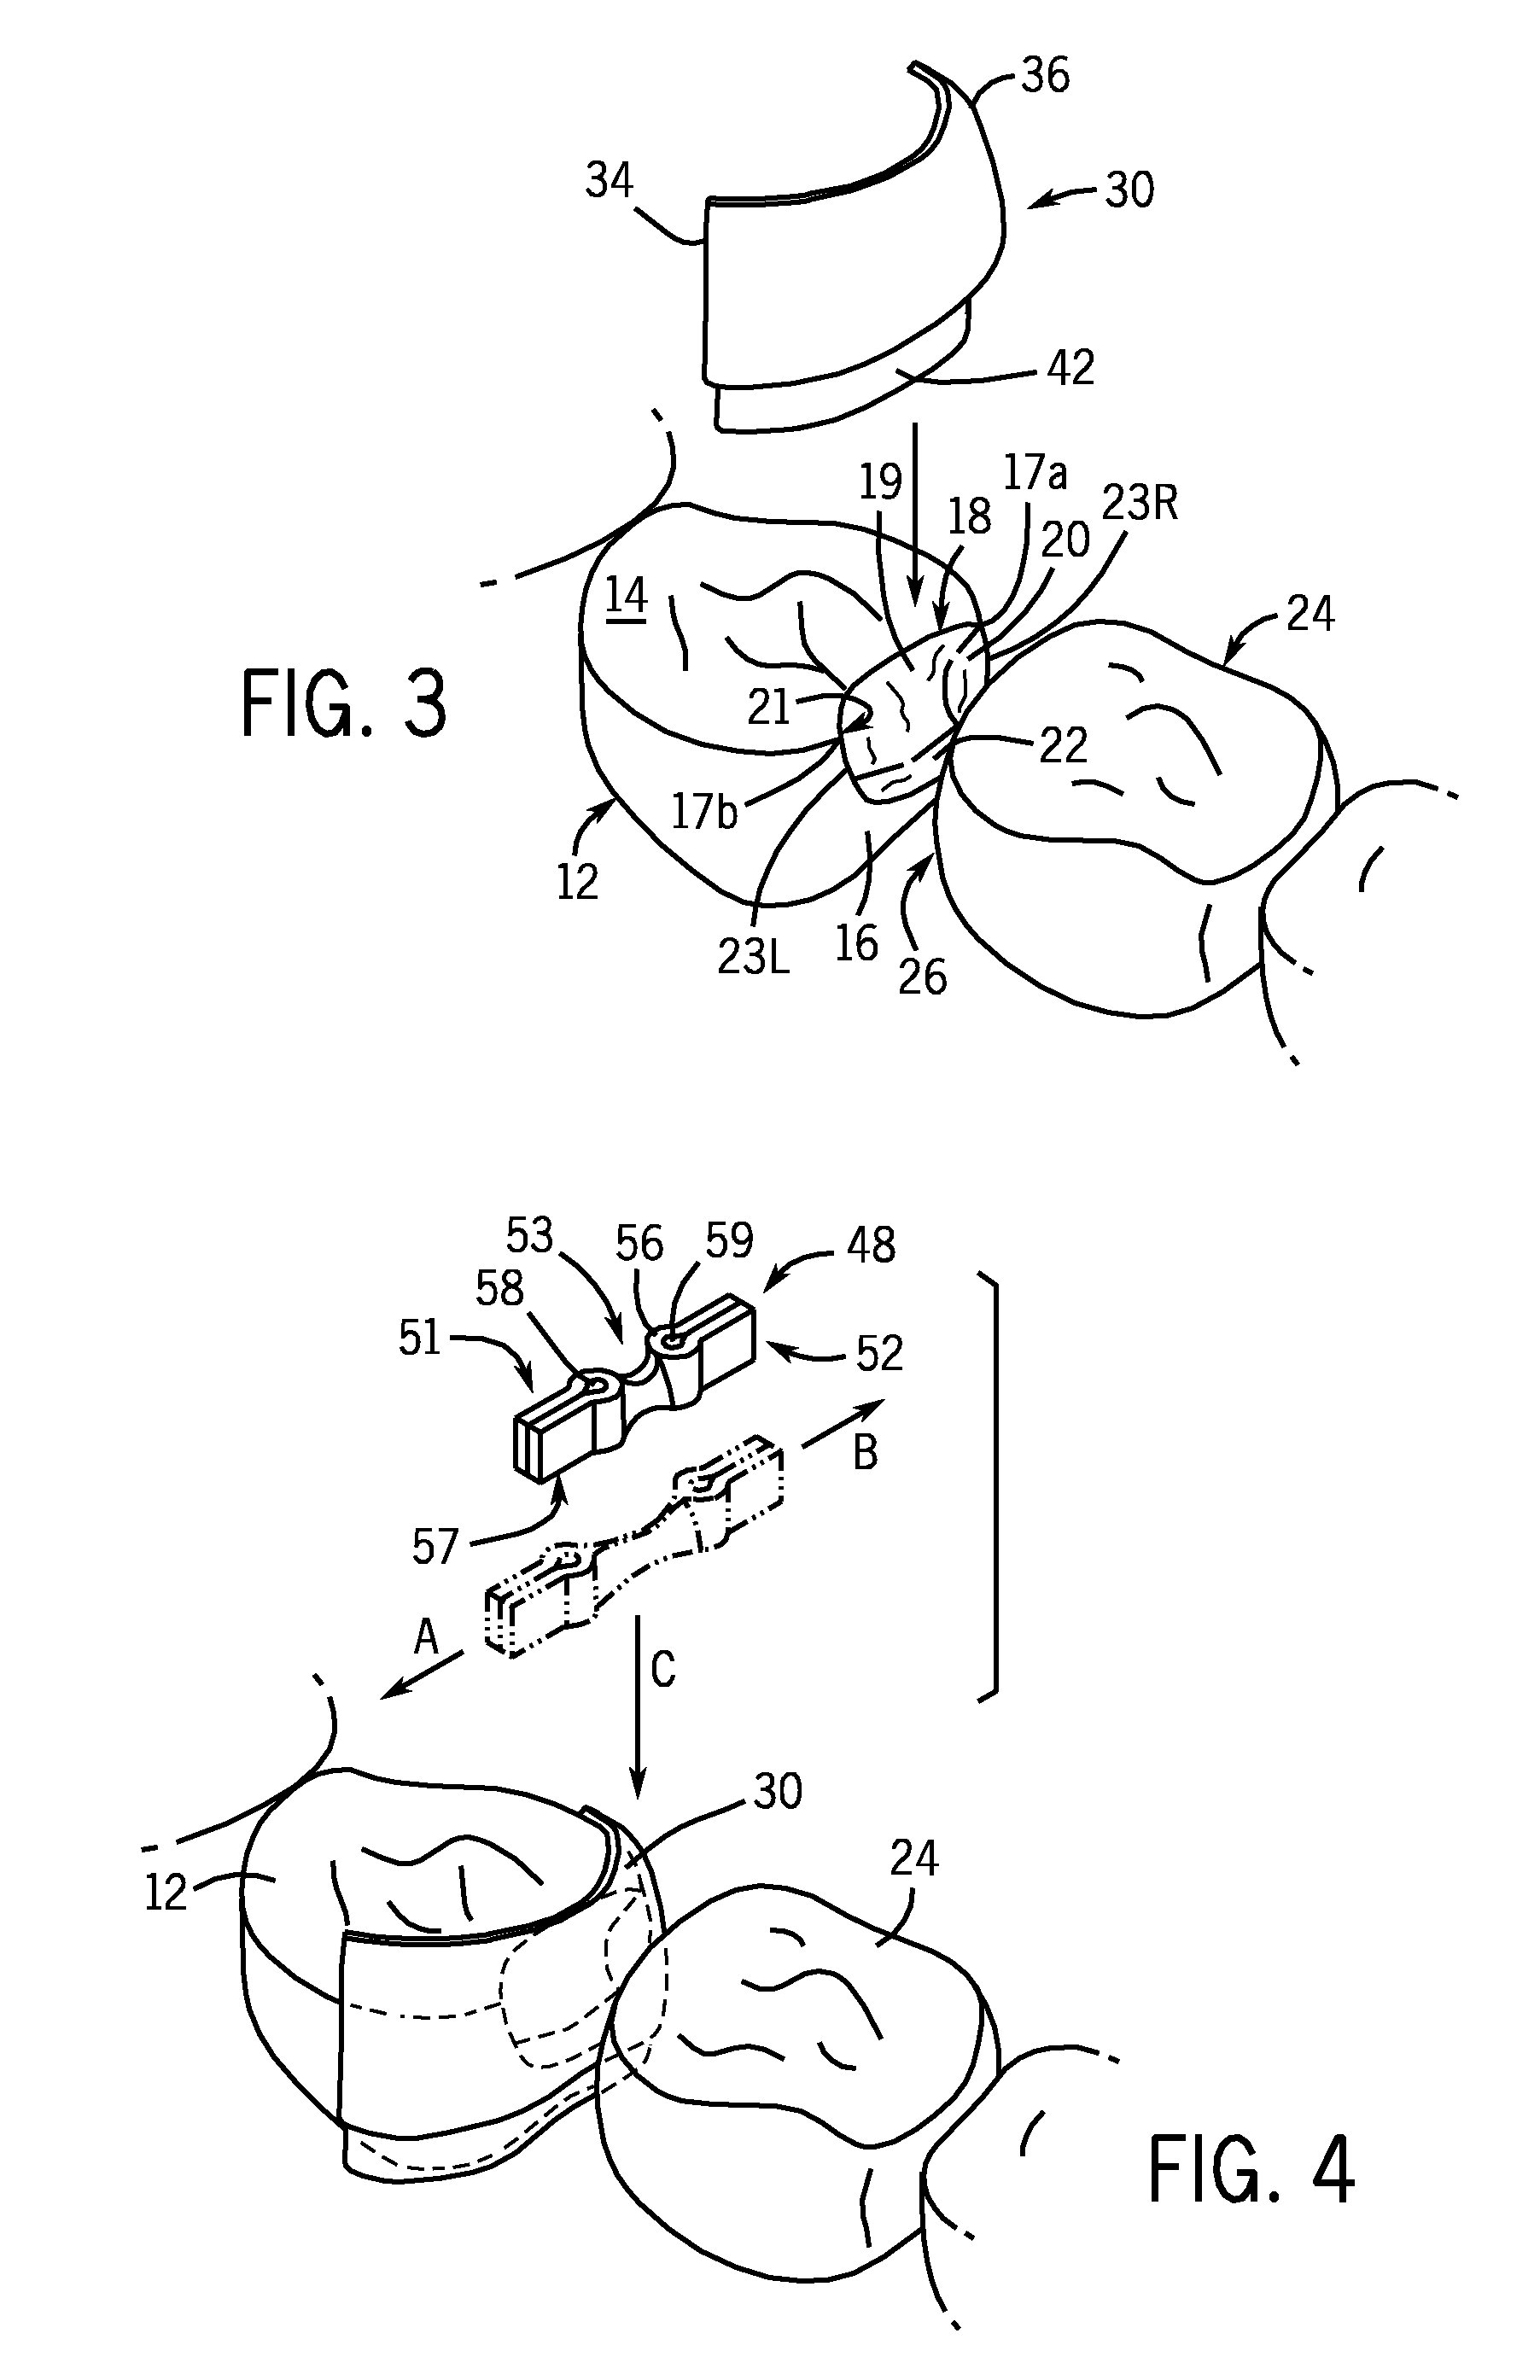 Dental Kits And A Seamless, Single Load Cavity Preparation And Filling Technique